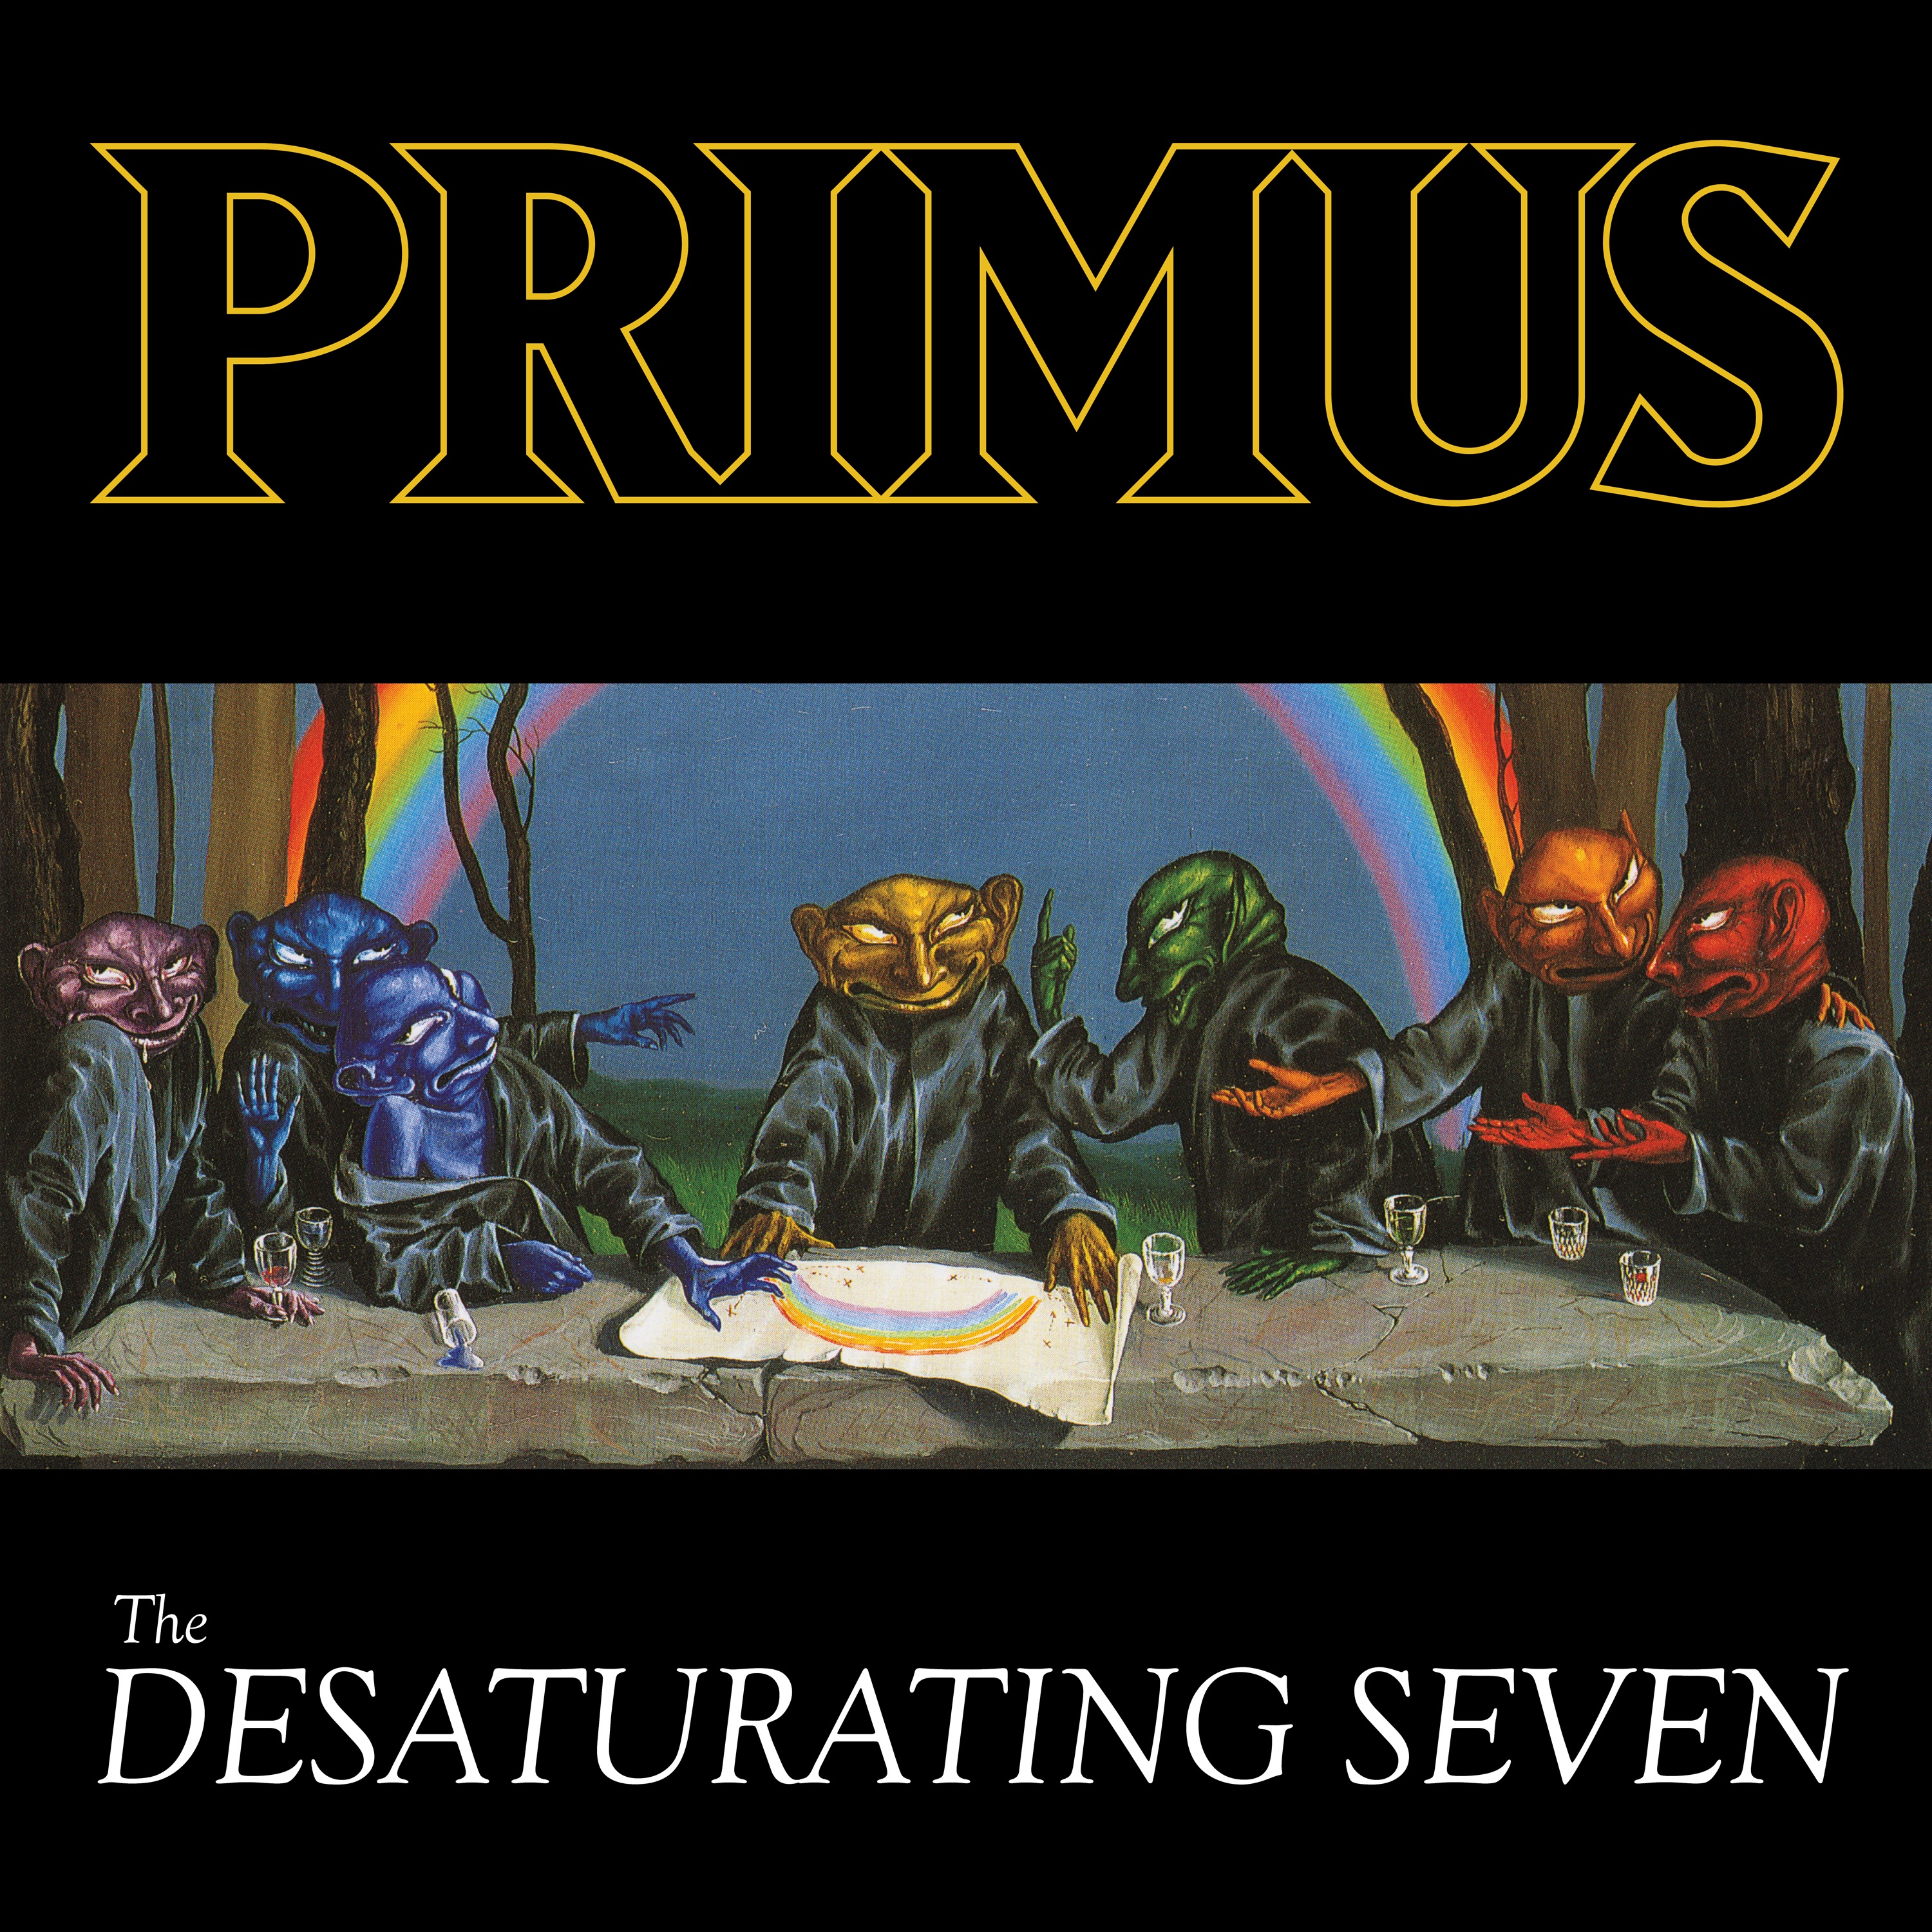 Primus Announce New Album <i>The Desaturating Seven</i>, Release “The Seven”” title=”Desaturating_Seven_Hi-Res-1501511551″ data-original-id=”251543″ data-adjusted-id=”251543″ class=”sm_size_full_width sm_alignment_center ” data-image-source=”professional” />
</p>		</div>
				</div>
						</div>
					</div>
		</div>
								</div>
					</div>
		</section>
				<section data-particle_enable=